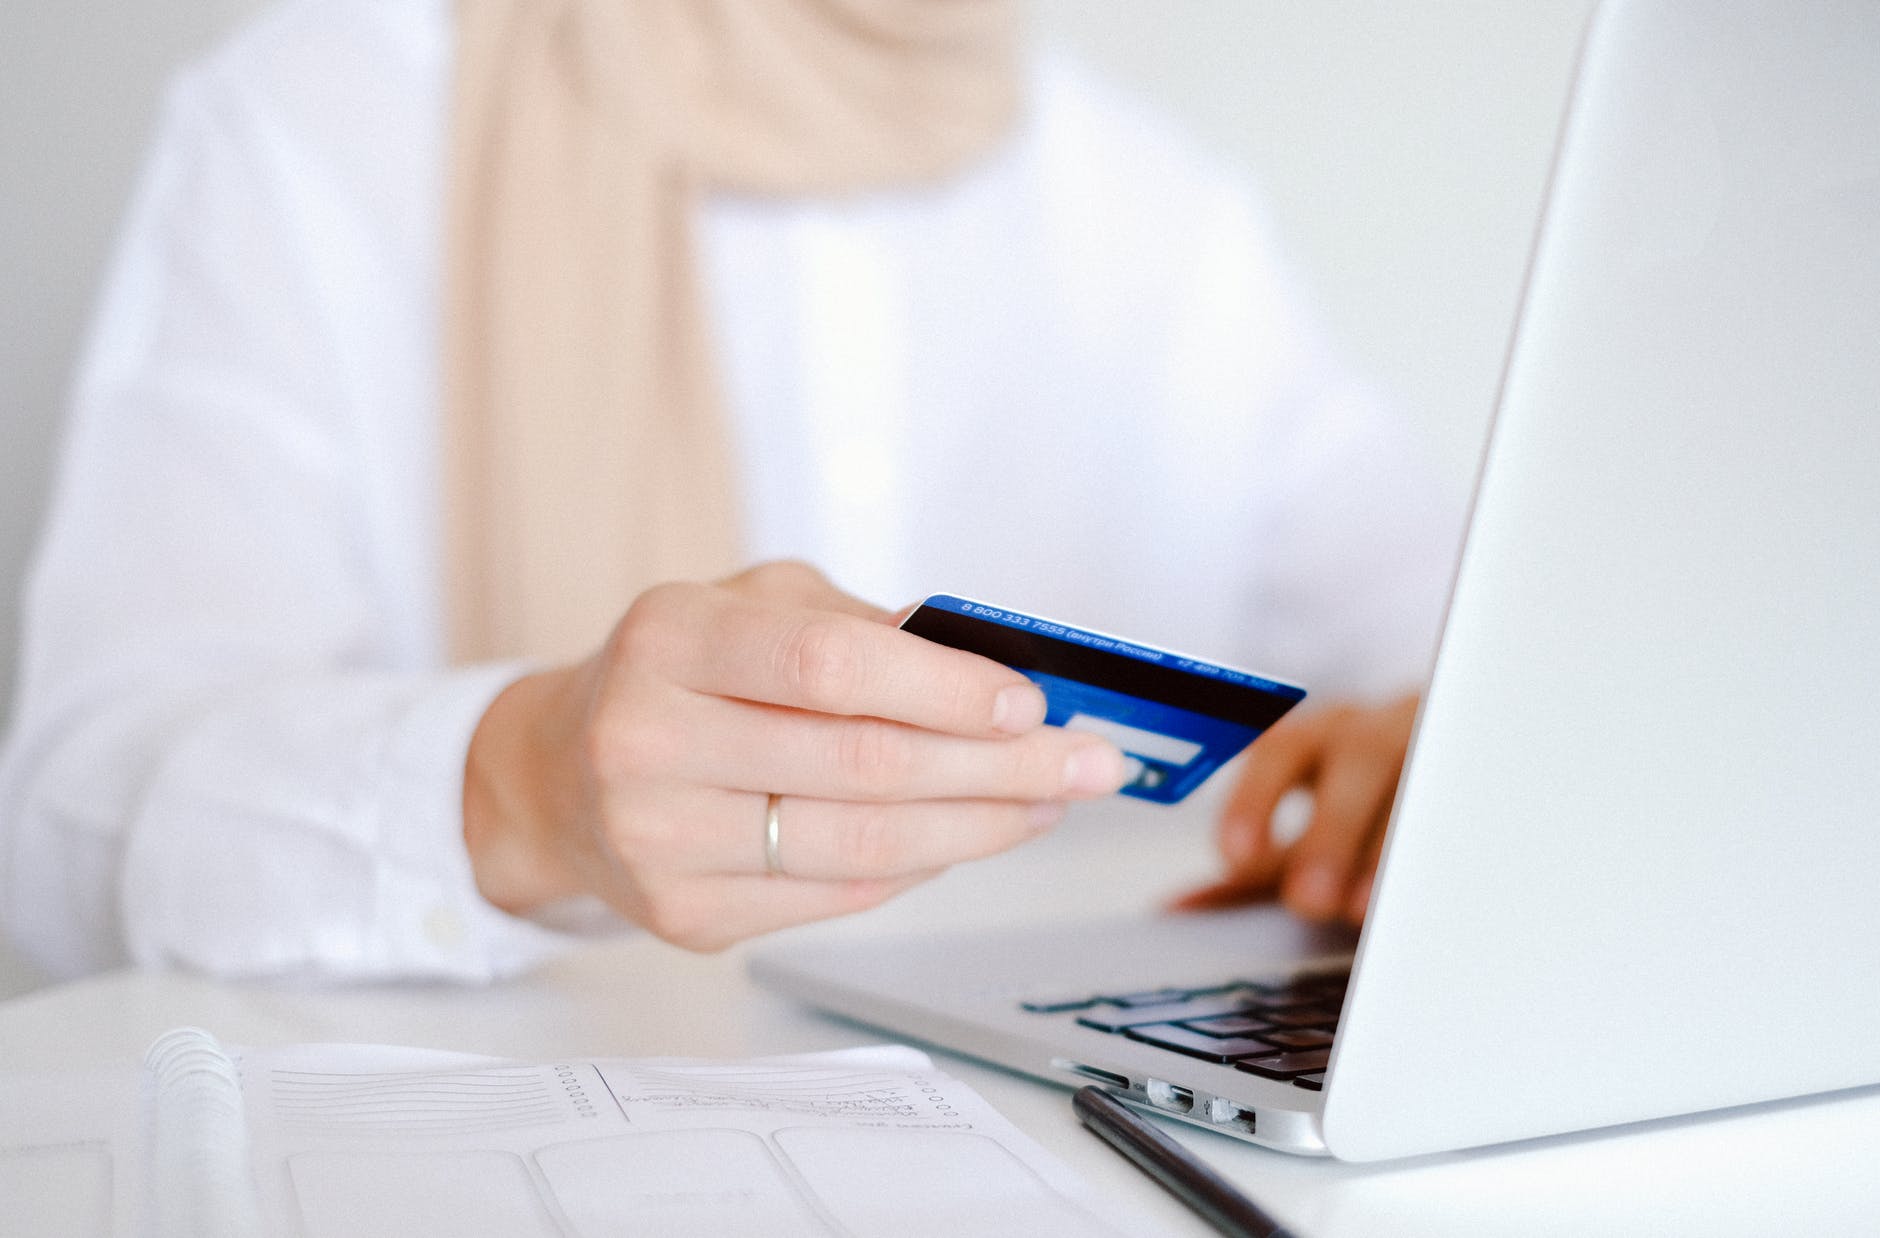 A woman in a white shirt about to make a payment with a debit card on her laptop.